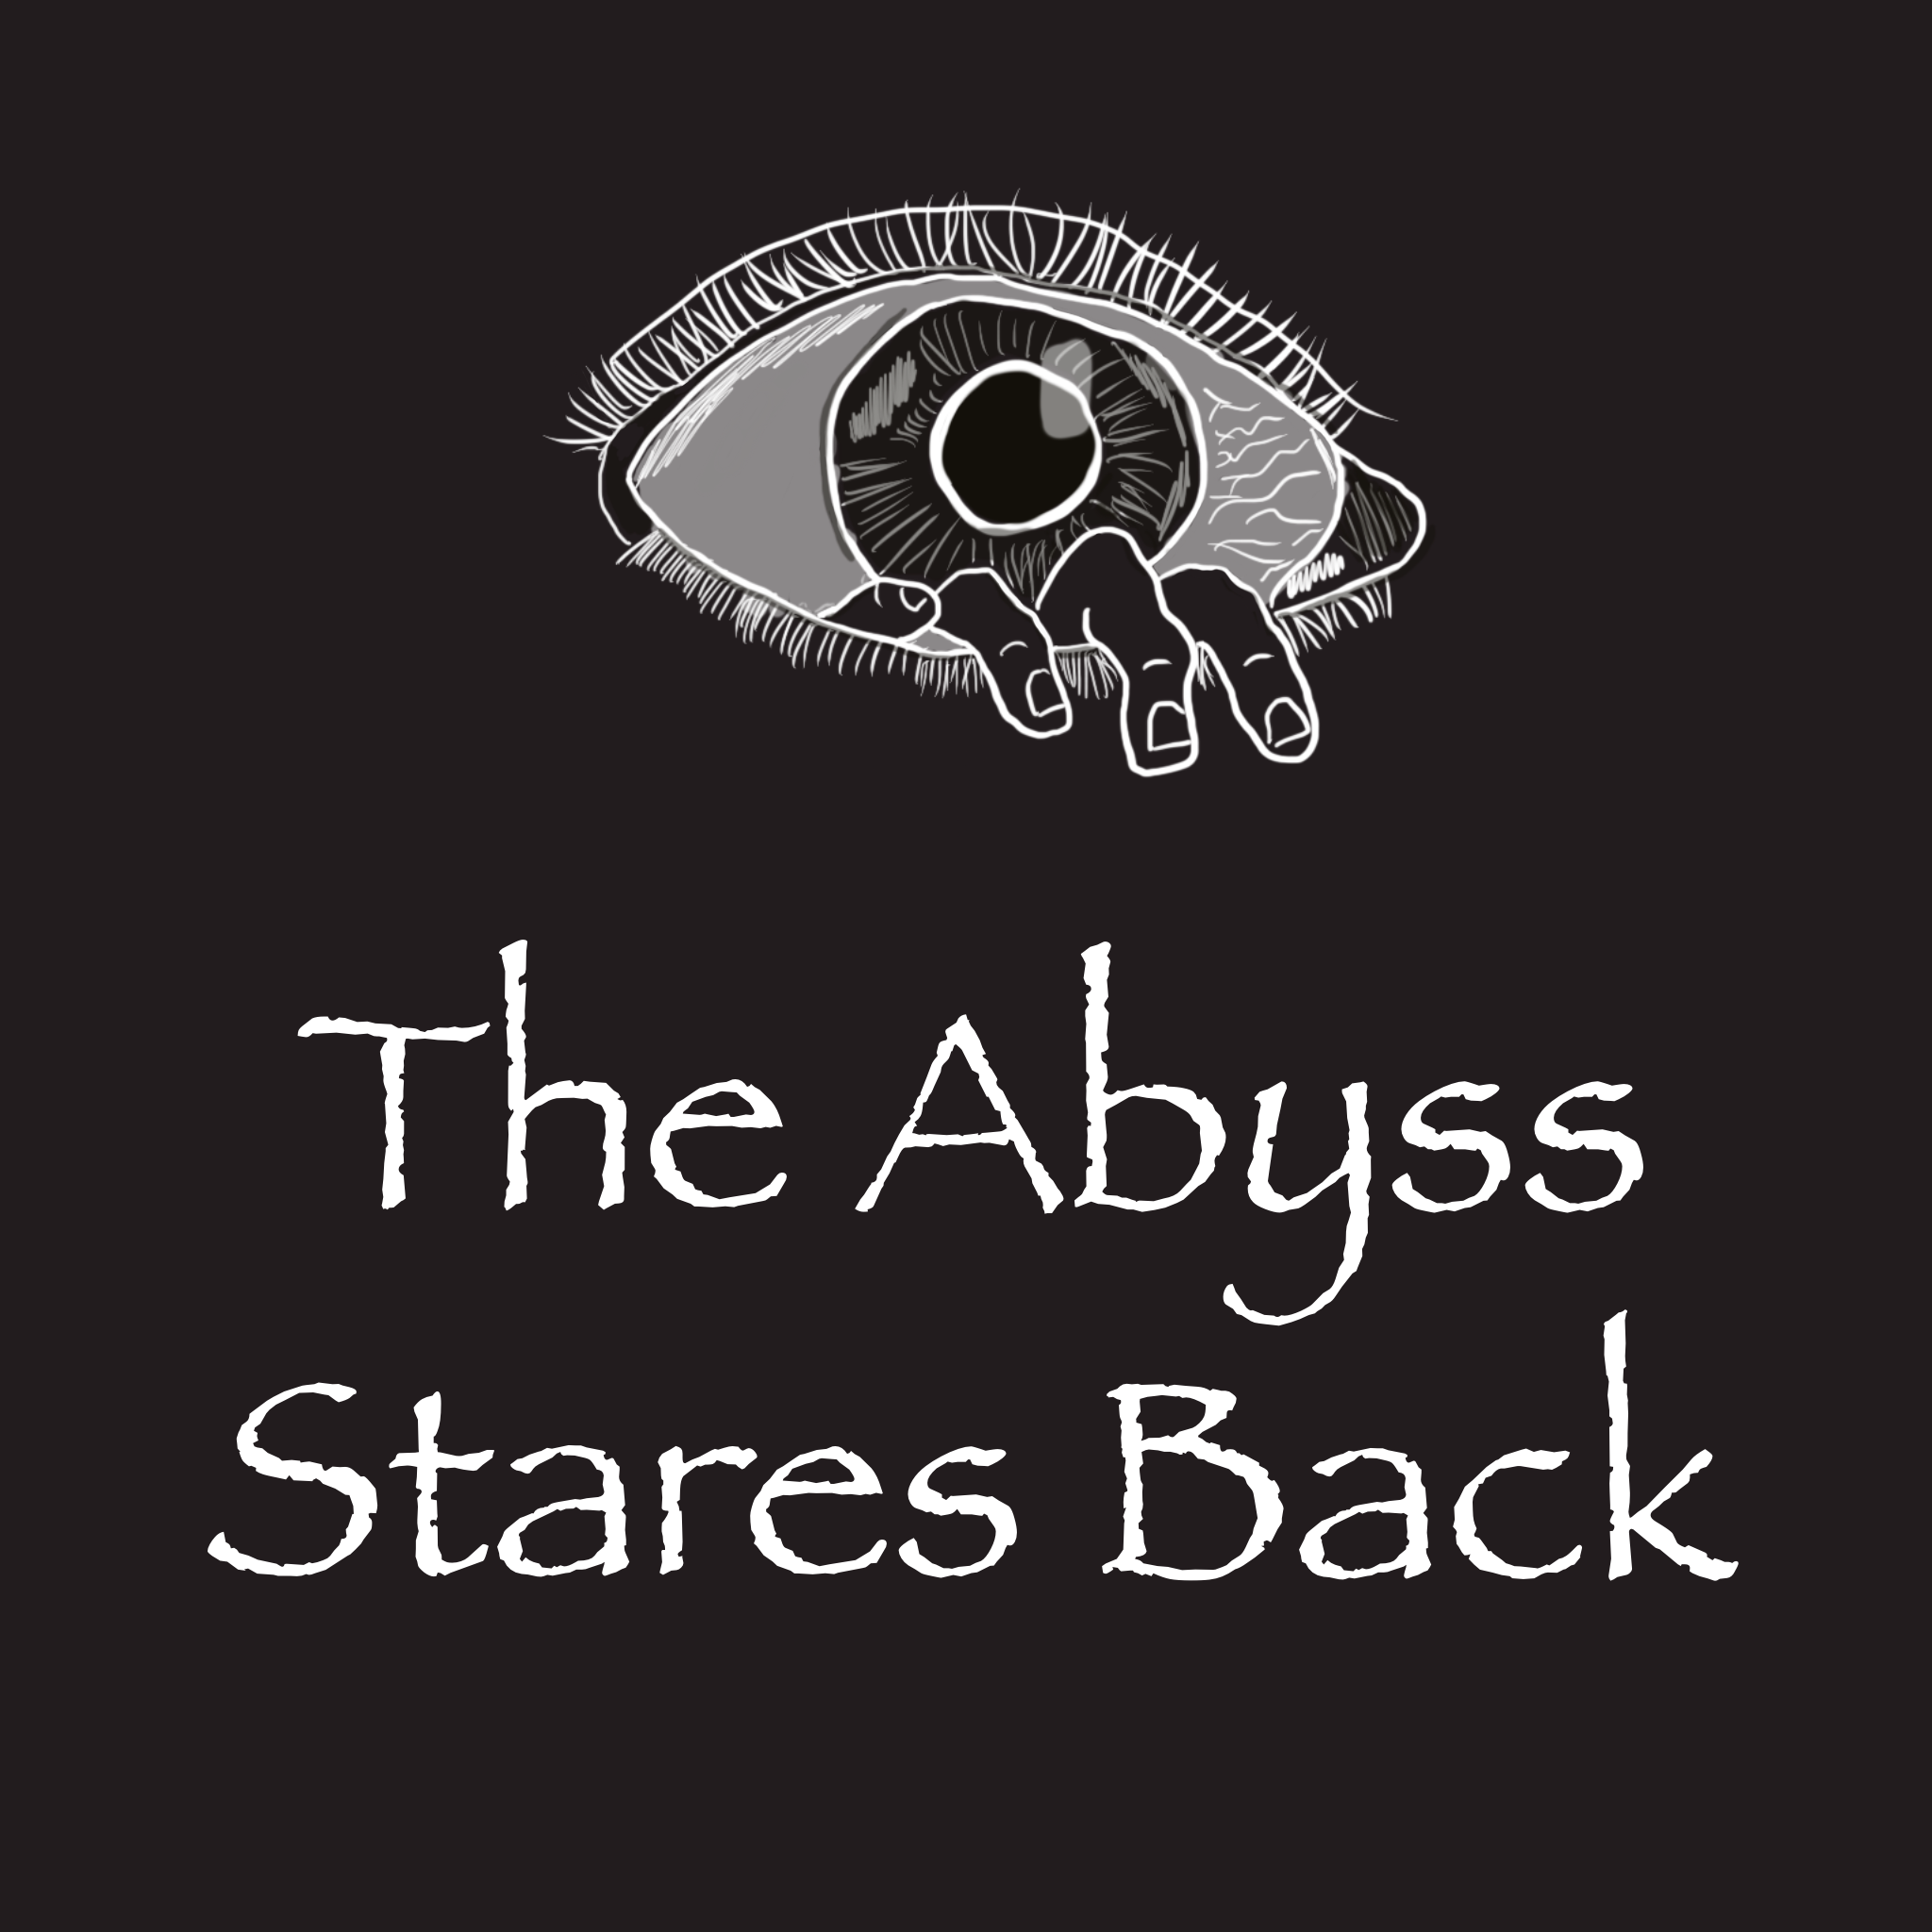 The Abyss Stares Back